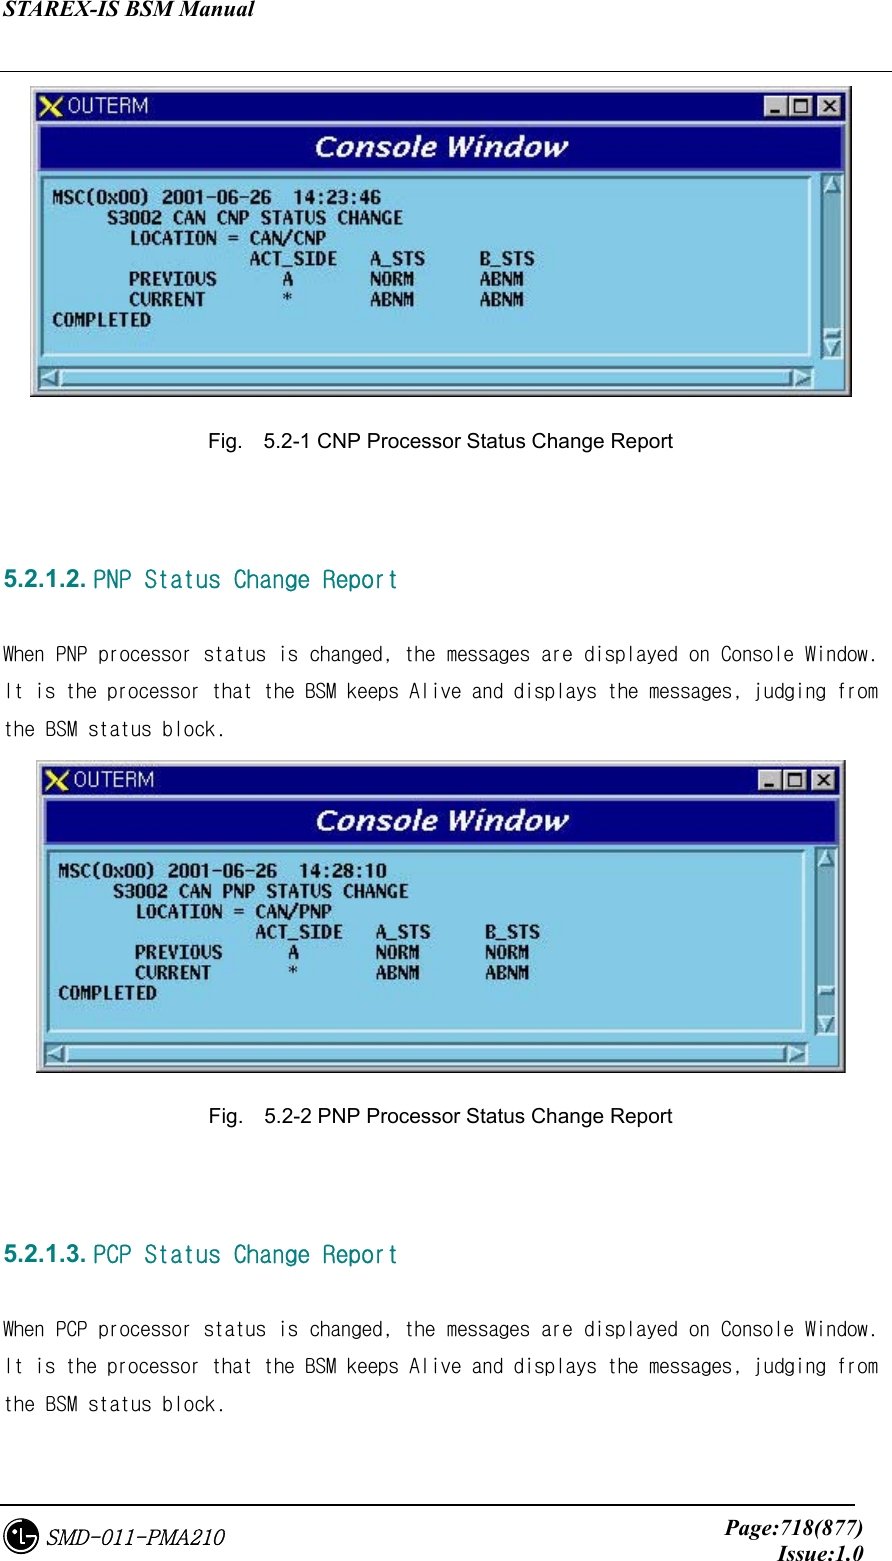 STAREX-IS BSM Manual     Page:718(877)Issue:1.0SMD-011-PMA210  Fig.    5.2-1 CNP Processor Status Change Report   5.2.1.2. PNP Status Change Report  When PNP processor status is changed, the messages are displayed on Console Window. It is the processor that the BSM keeps Alive and displays the messages, judging from the BSM status block.  Fig.    5.2-2 PNP Processor Status Change Report   5.2.1.3. PCP Status Change Report  When PCP processor status is changed, the messages are displayed on Console Window. It is the processor that the BSM keeps Alive and displays the messages, judging from the BSM status block. 